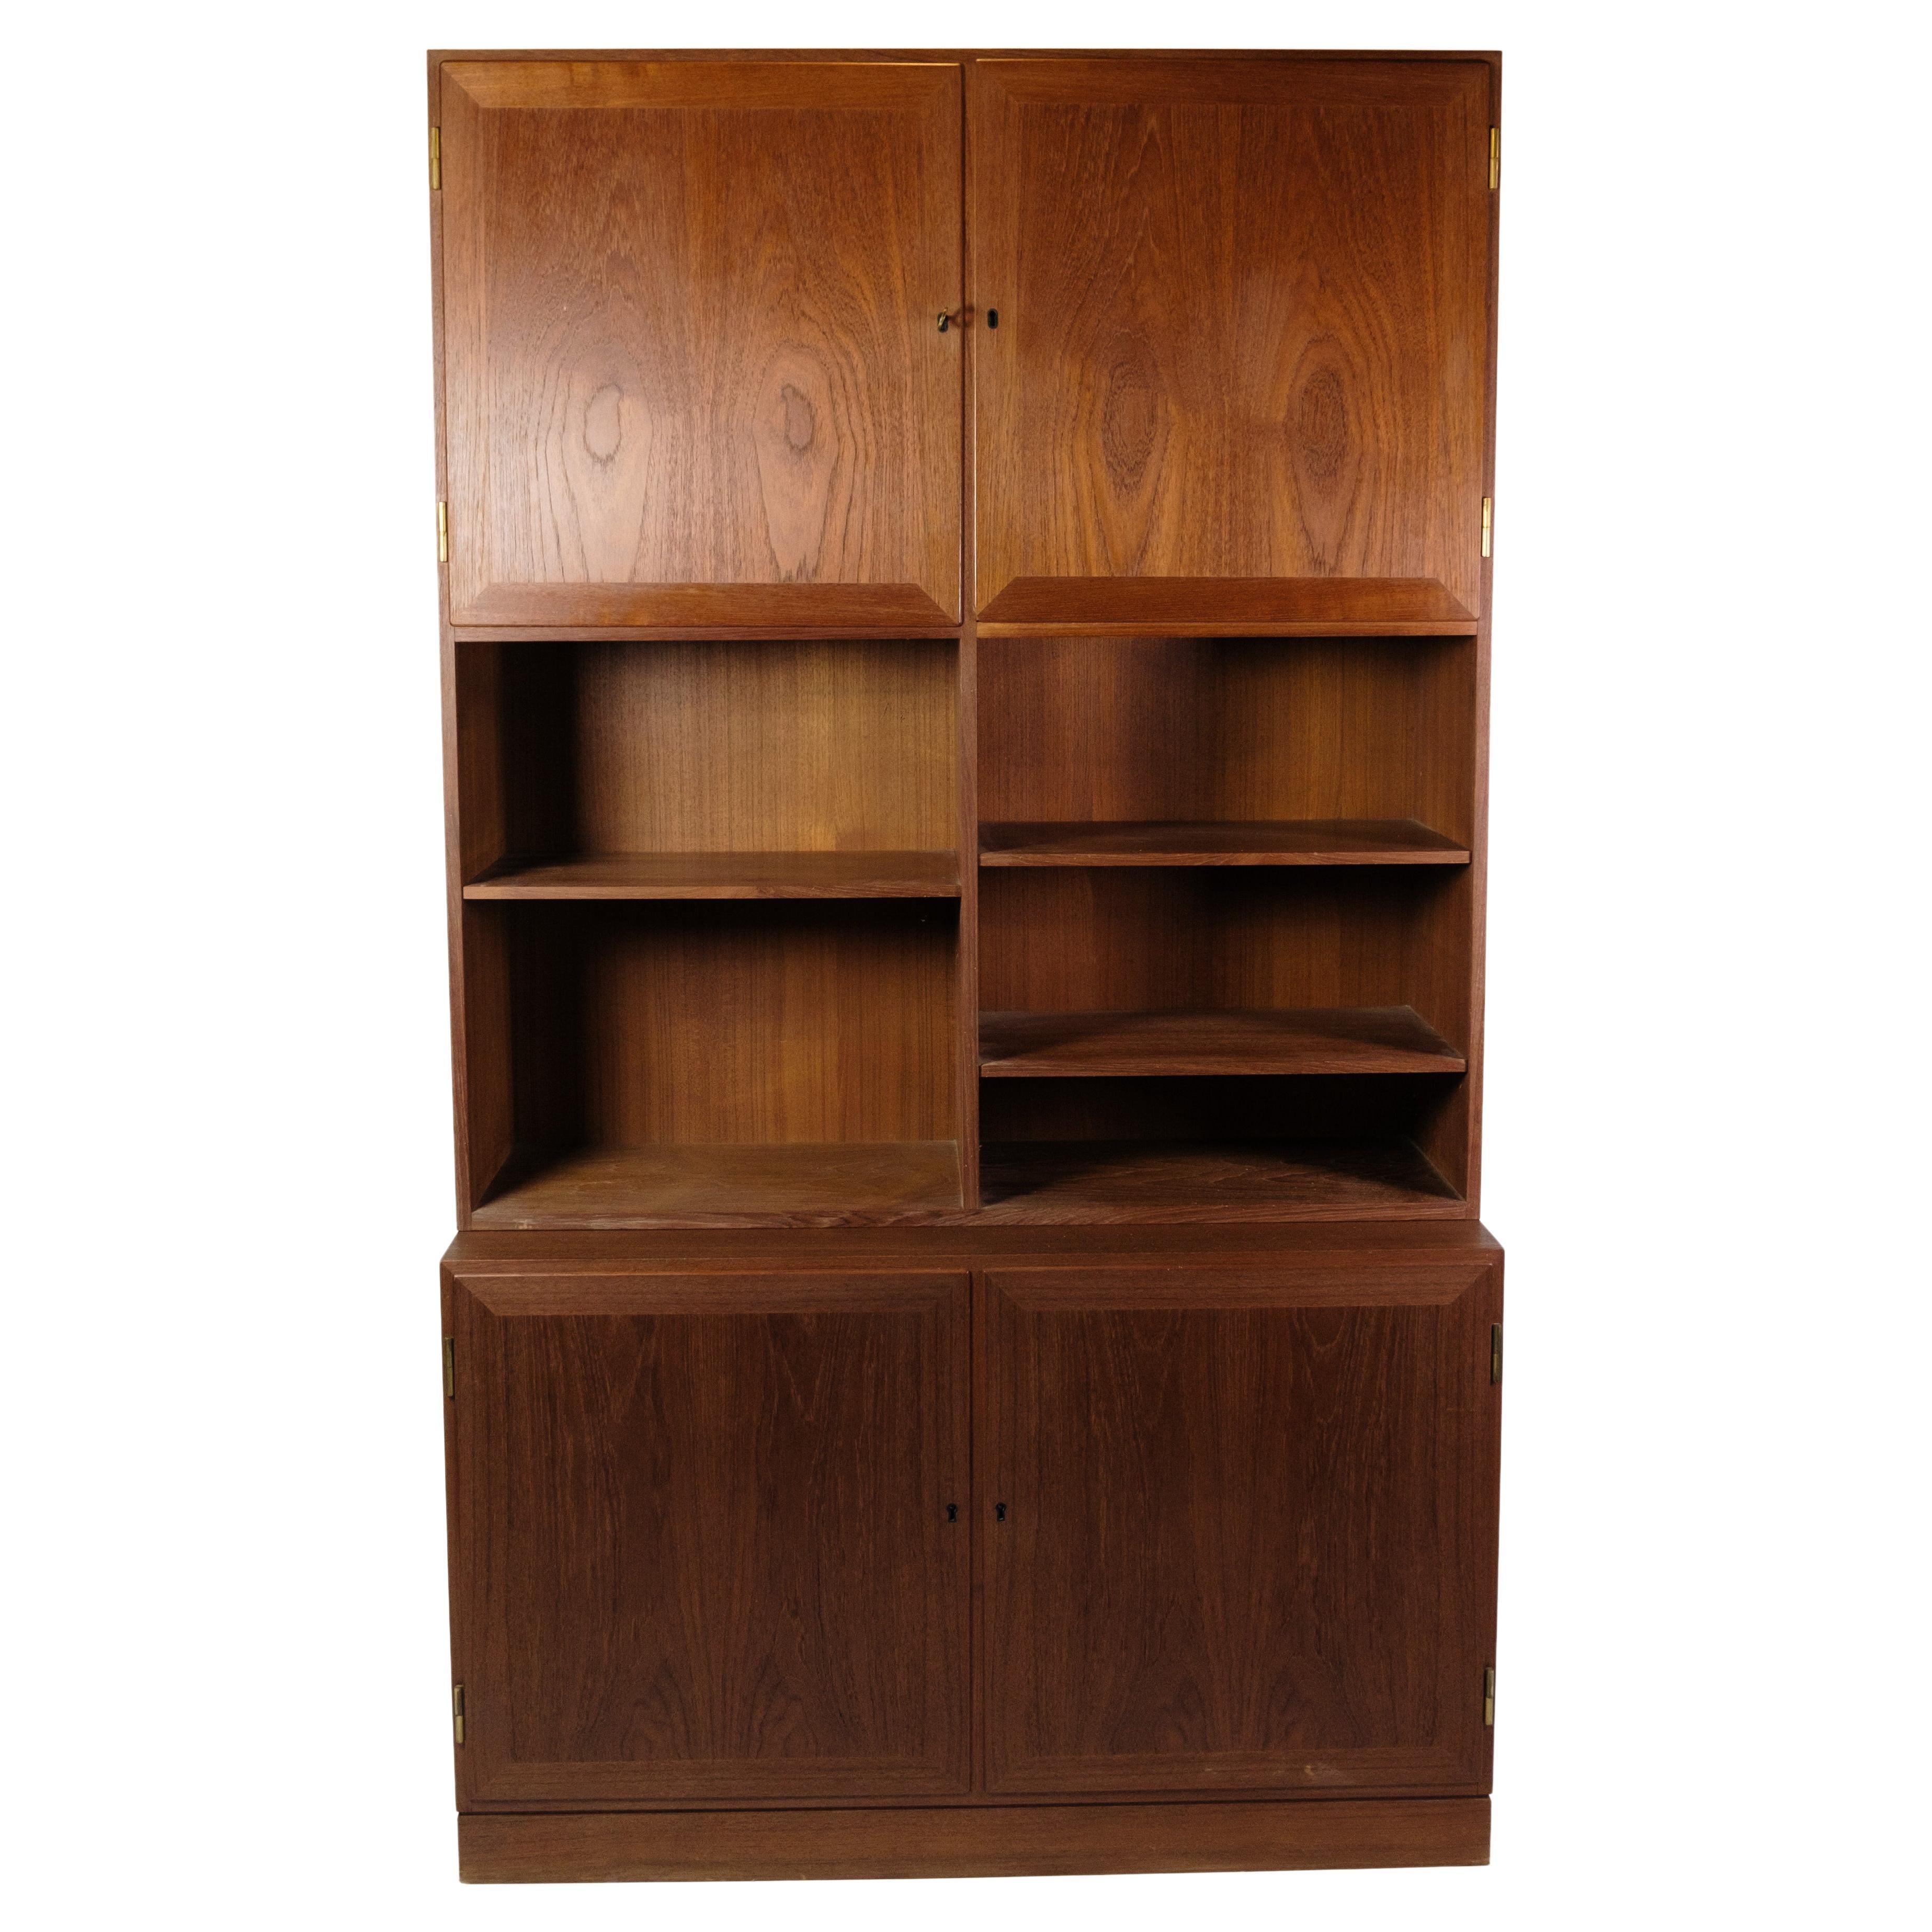 Bookcase Made In Teak, Danish design From 1960s For Sale